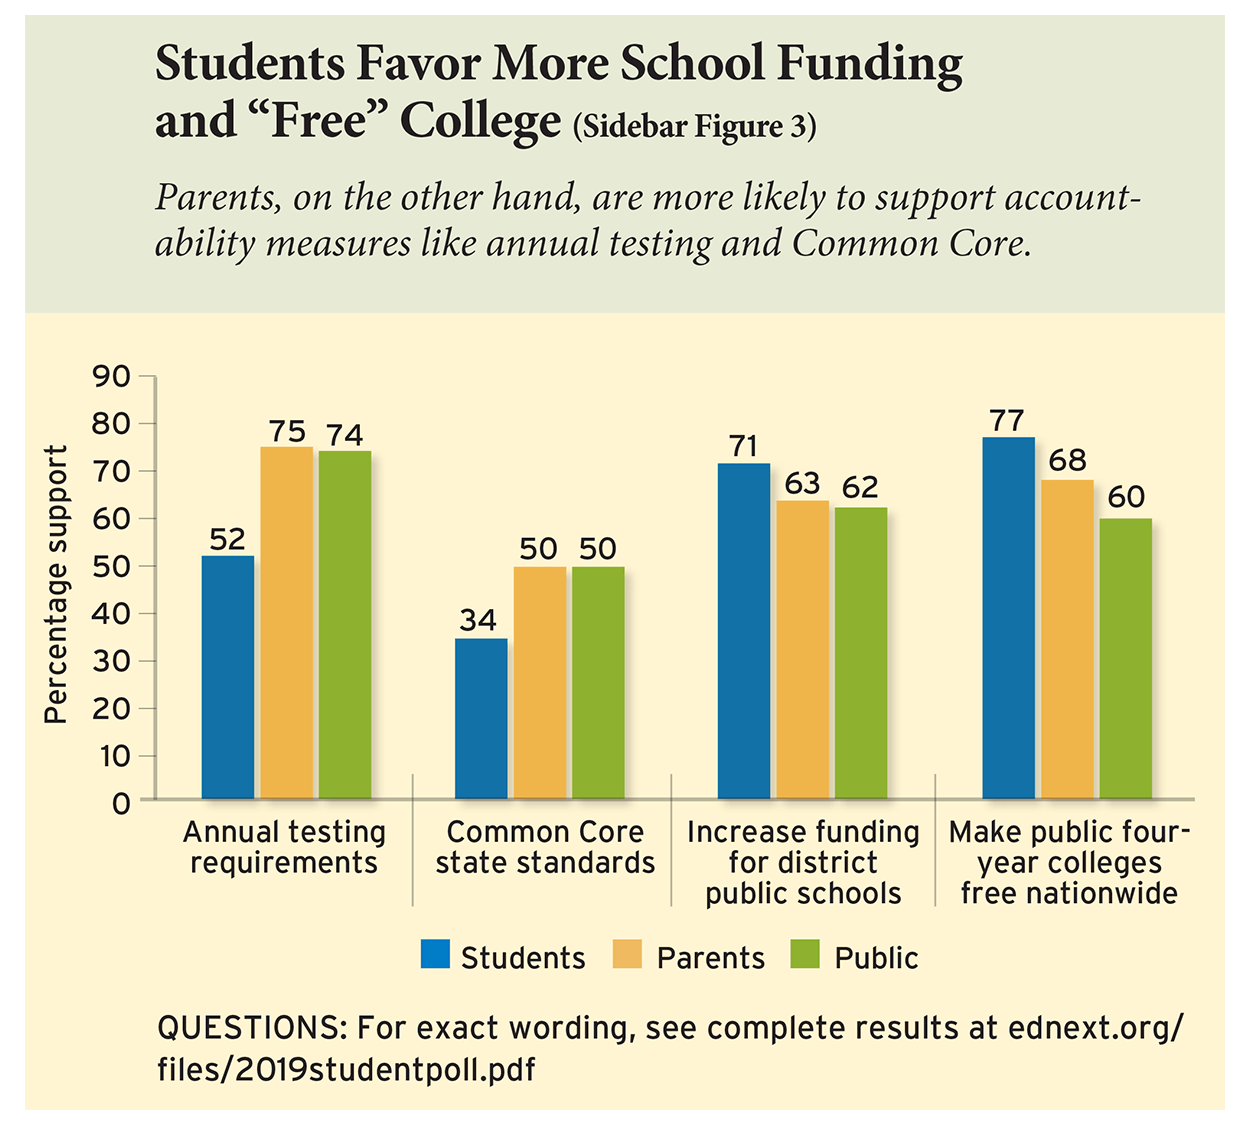 Students Favor More School Funding and “Free” College (Sidebar Figure 3)